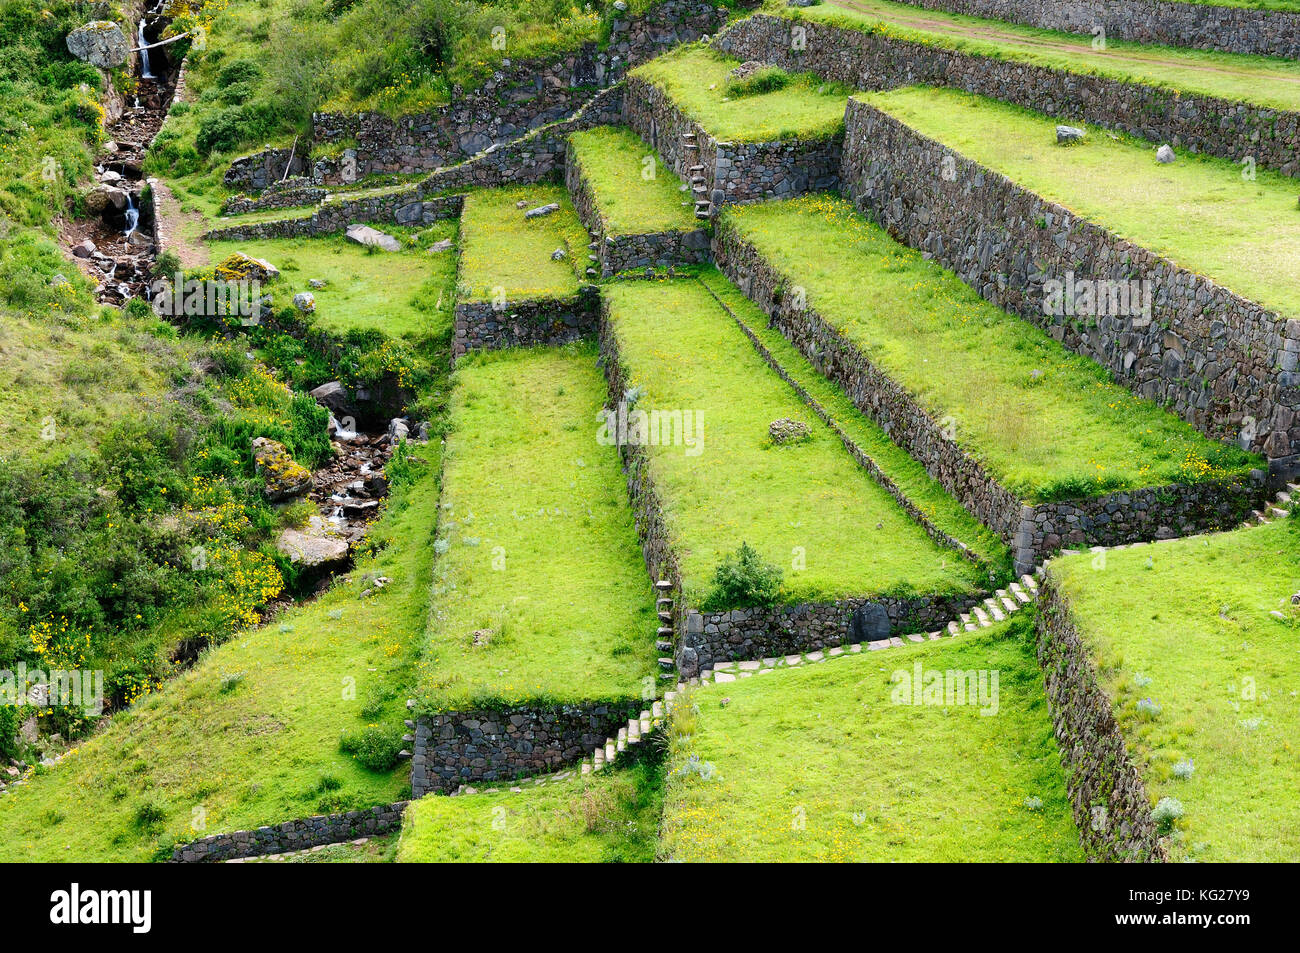 Inca agricultural terraces on slopes in Peru Stock Photo